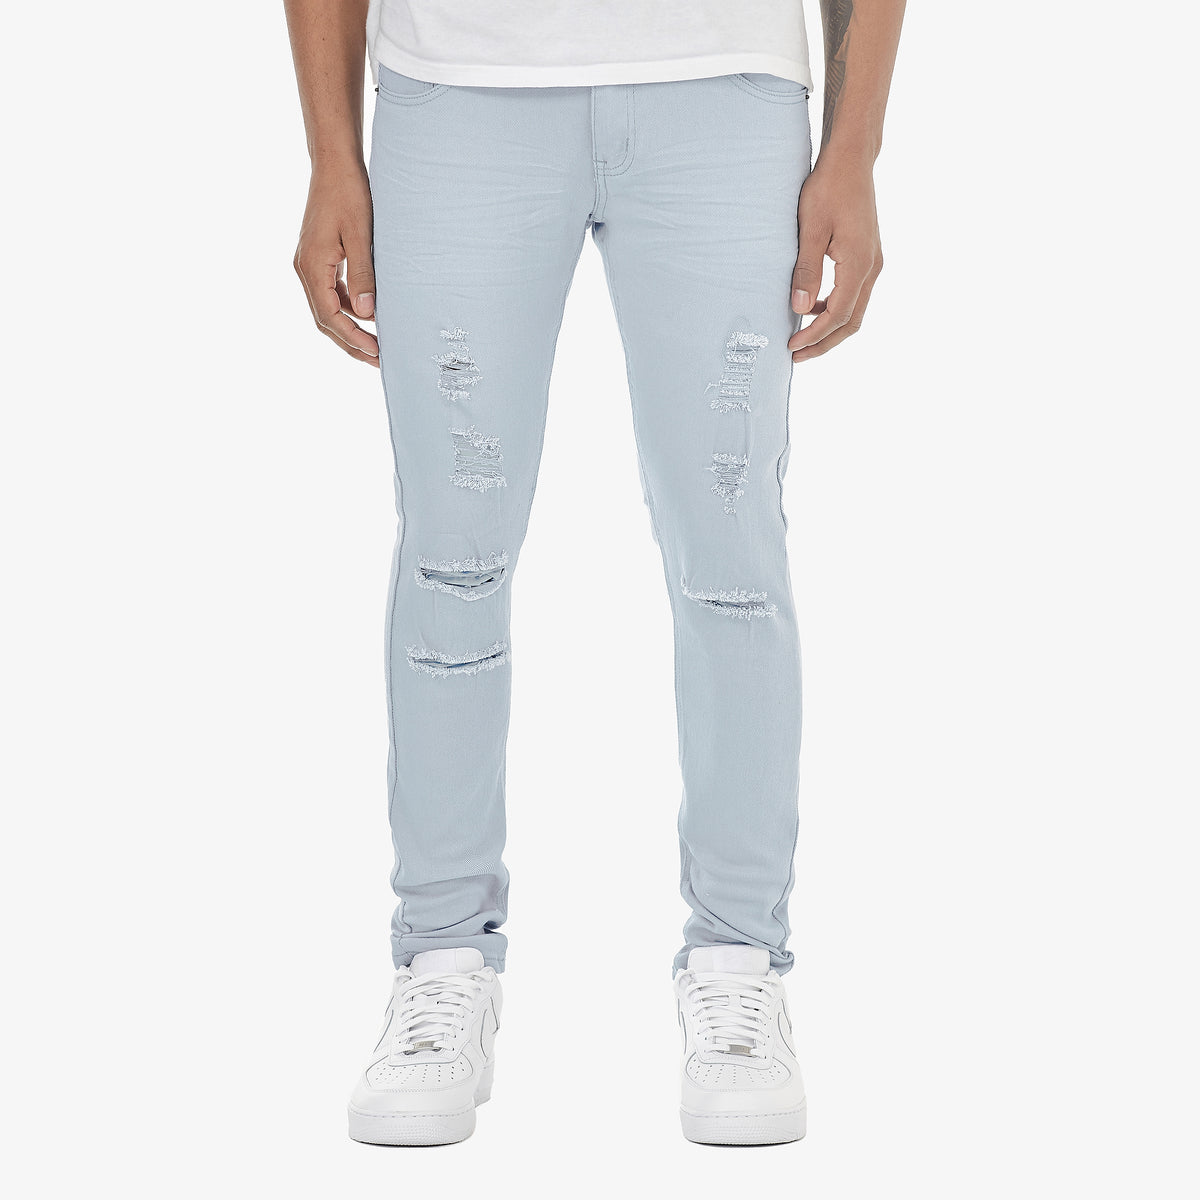 LIGHT BLUE PANTS WITH RIPS